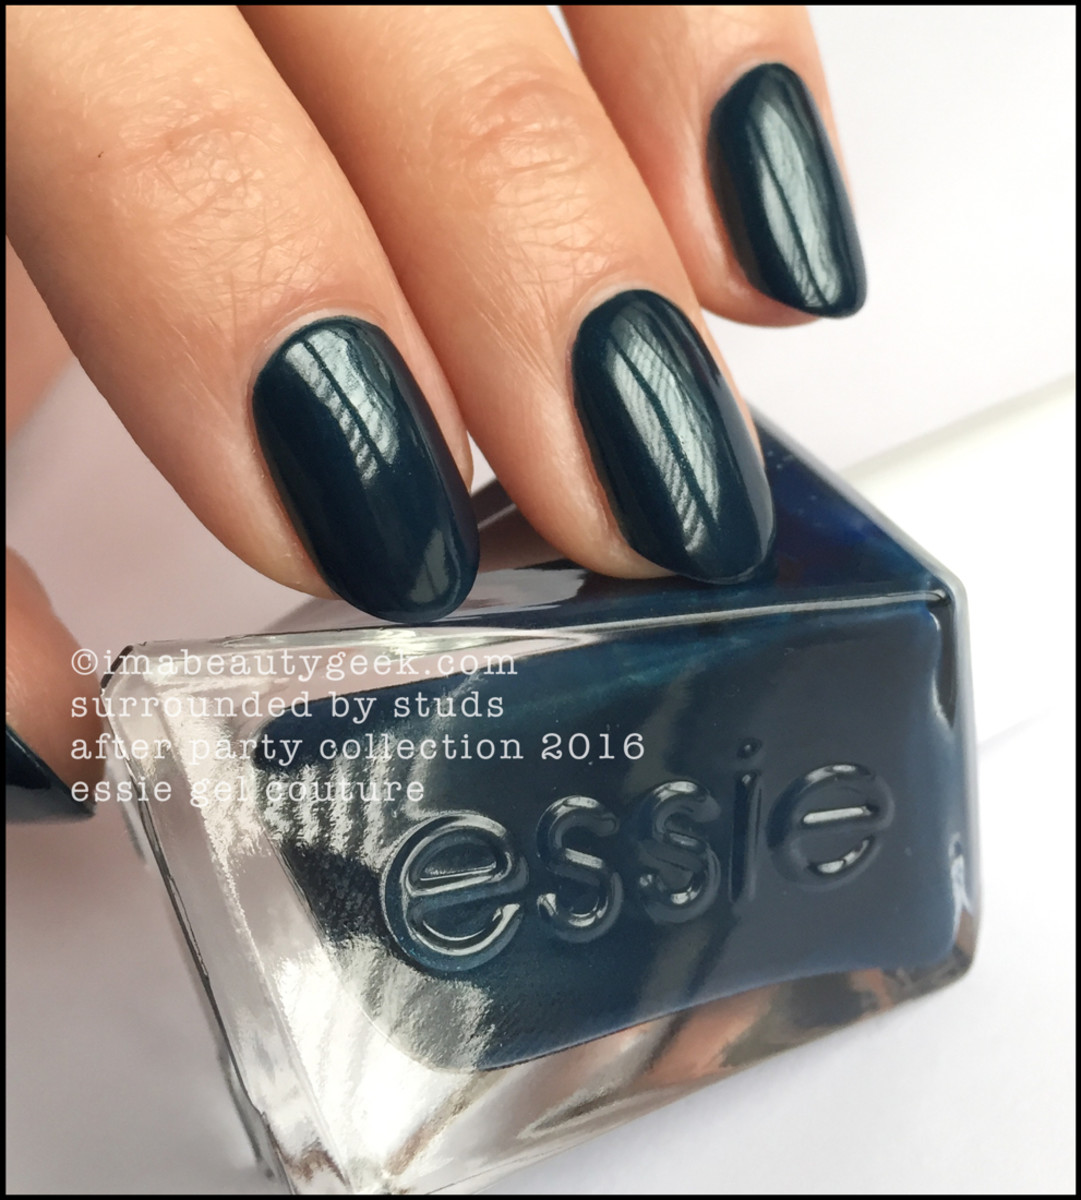 Essie Gel Couture Swatches Review_Essie Surrounded By Studs 2016